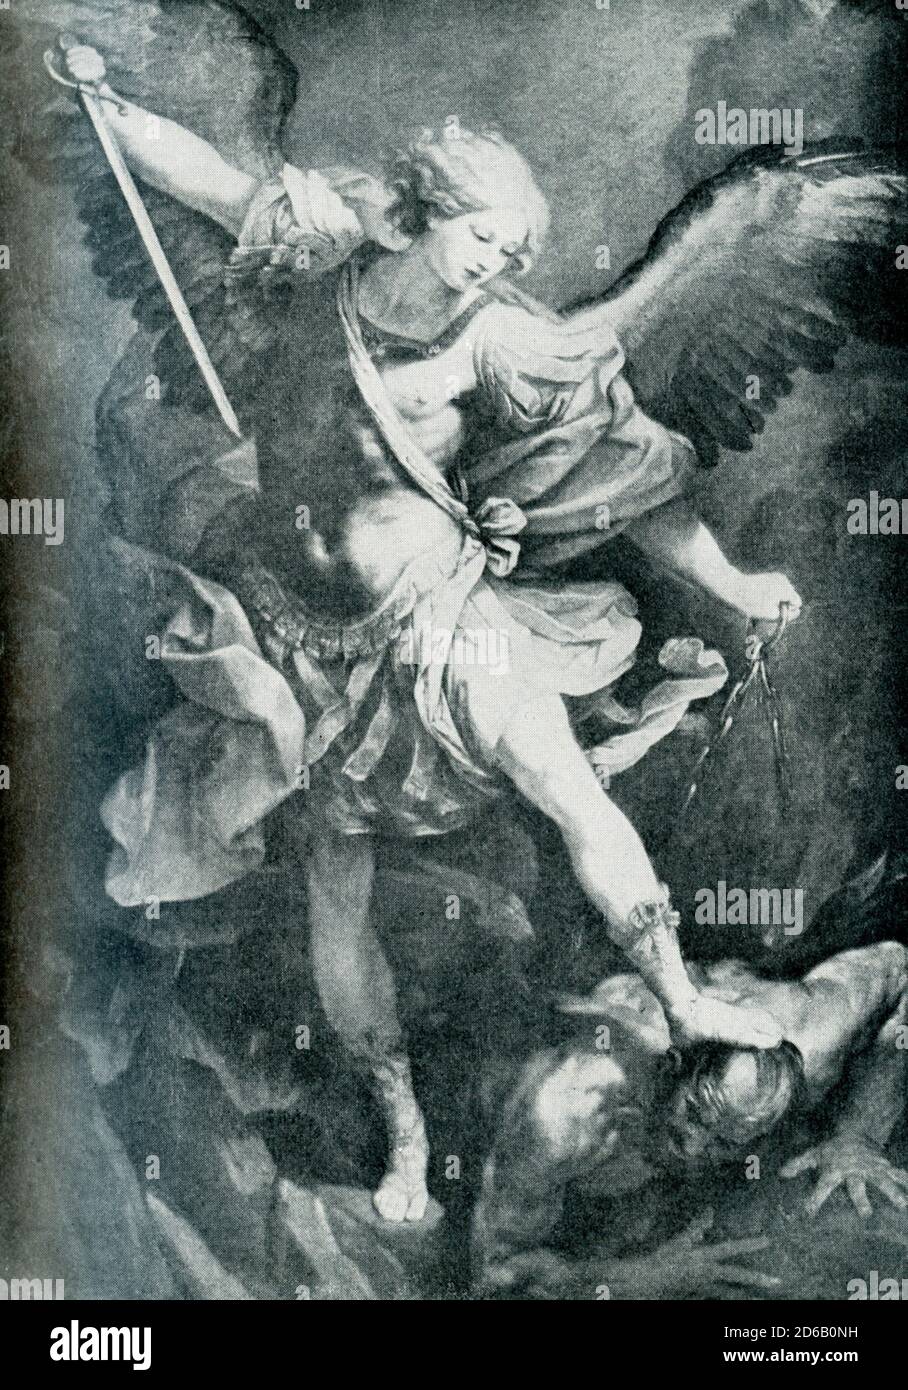 St Michael and the Dragon by Guido Reni. Michael came to represent the triumph of light over darkness as interpreted by the Christian Church, in the teachings of which he came to embody the triumph of Christ over anti-Christ. Guido Reni’s resplendently theatrical depiction here of St Michael slaying the dragon shows Michael as part Roman soldier, part ballet dancer. It was painted in 1635 and can be seen in the church of Santa Maria della Consolazione in Rome. The picture is a beautiful example of Reni’s late style, which was repeatedly admired by his contemporaries for what they called “grazi Stock Photo